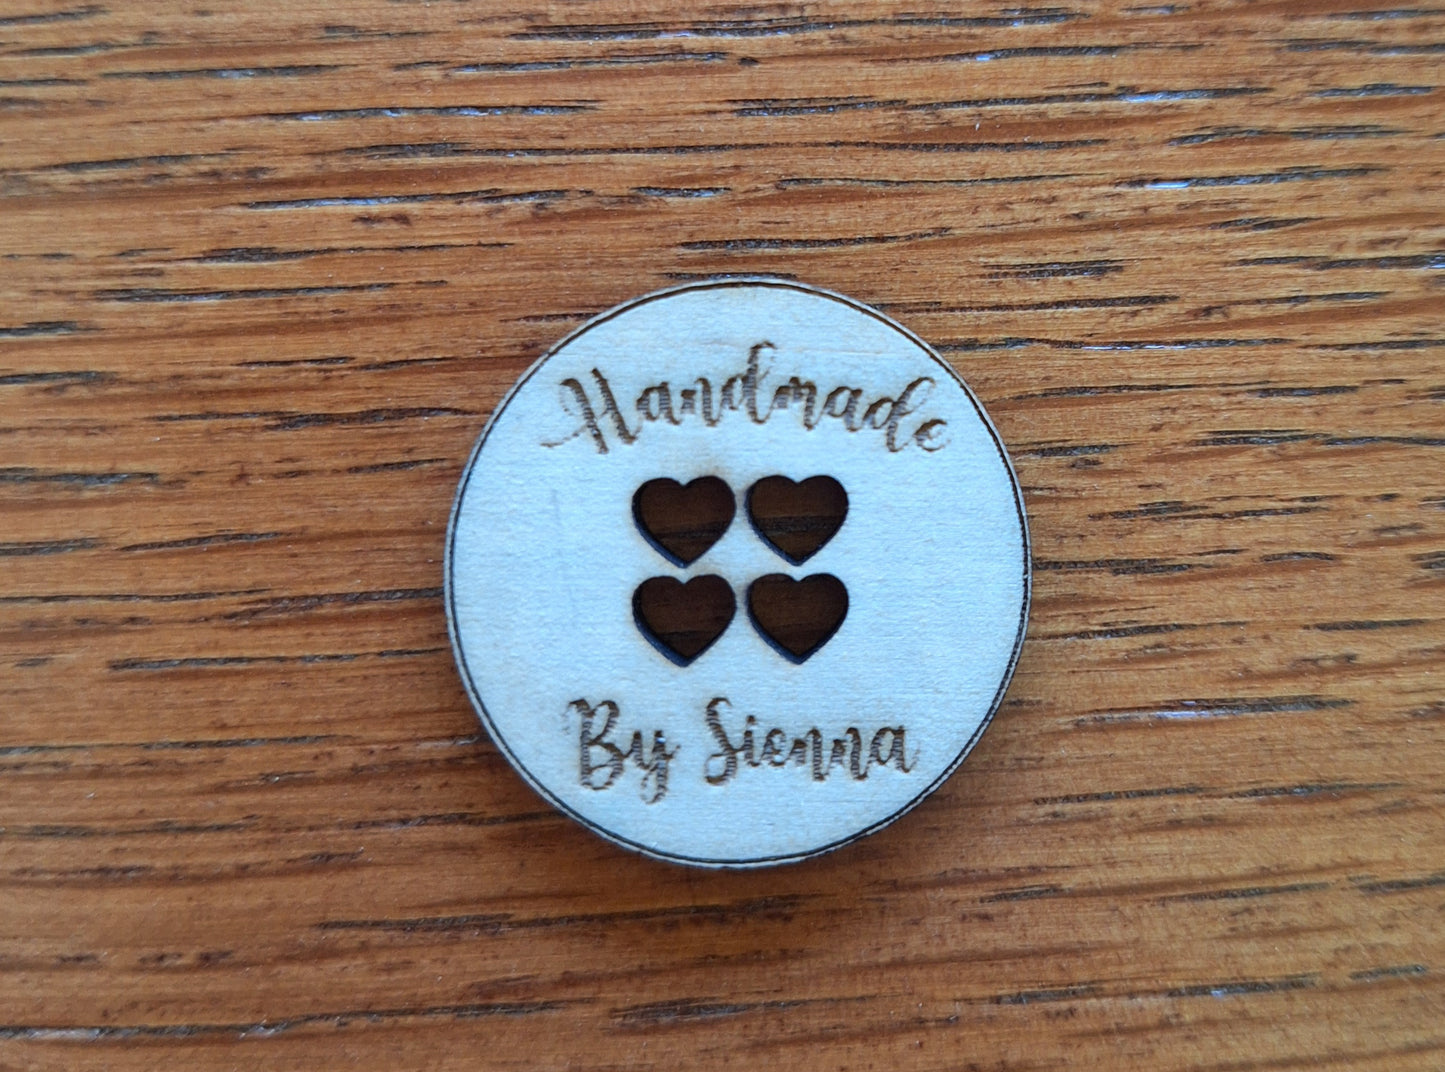 Personalized Knitting Buttons